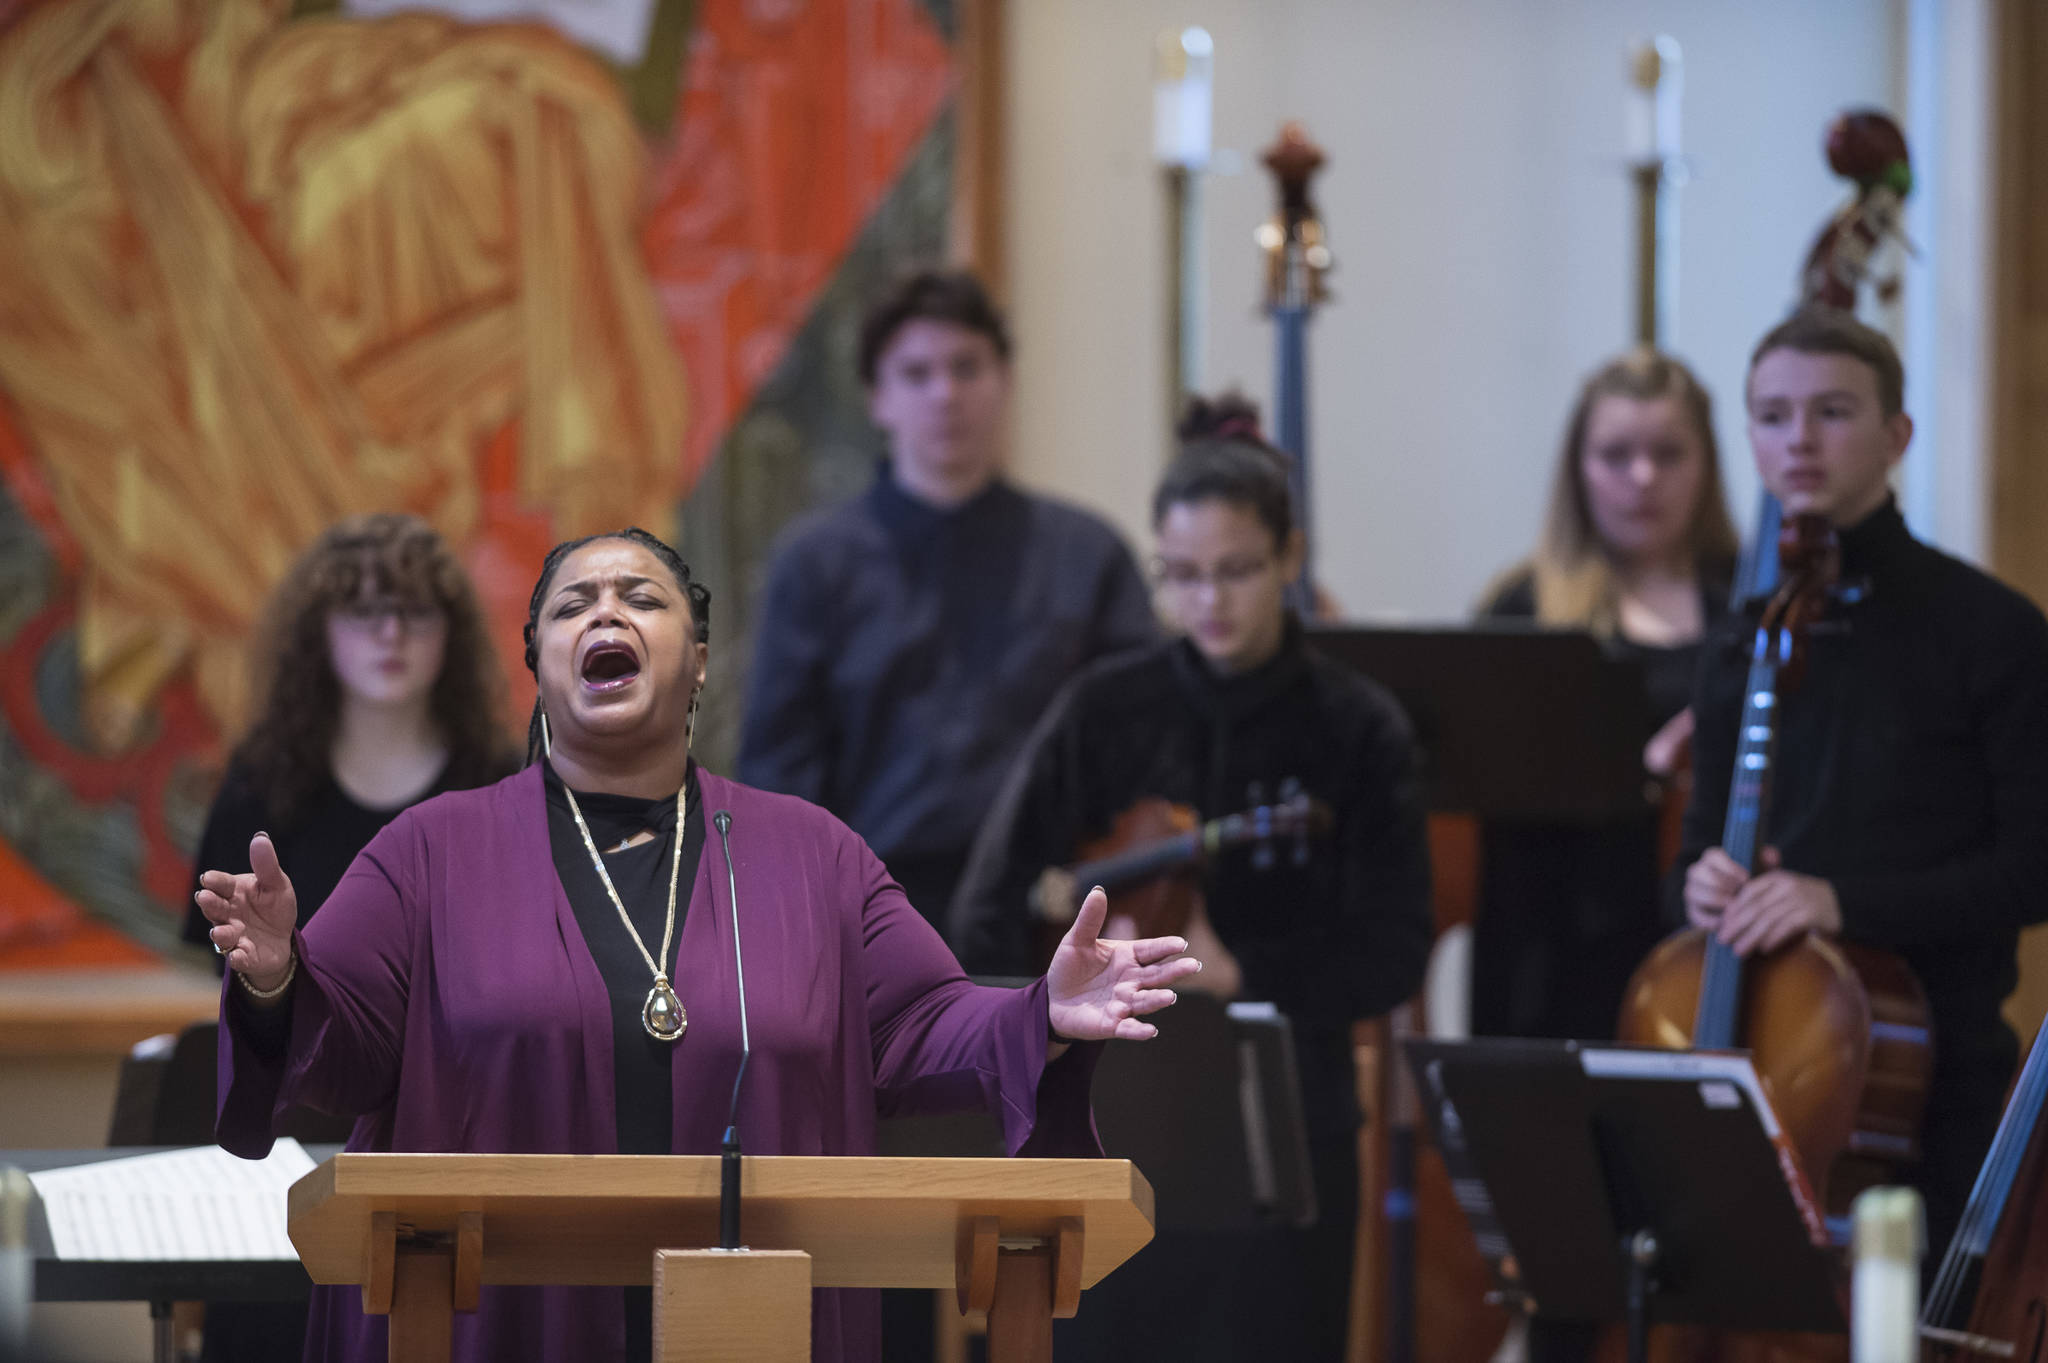 Sherry Patterson sings “The Lord’s Prayer” at the Dr. Martin Luther King Jr. 2019 Community Celebration at St. Paul’s Catholic Church on Monday, Jan. 21, 2019. (Michael Penn | Juneau Empire)